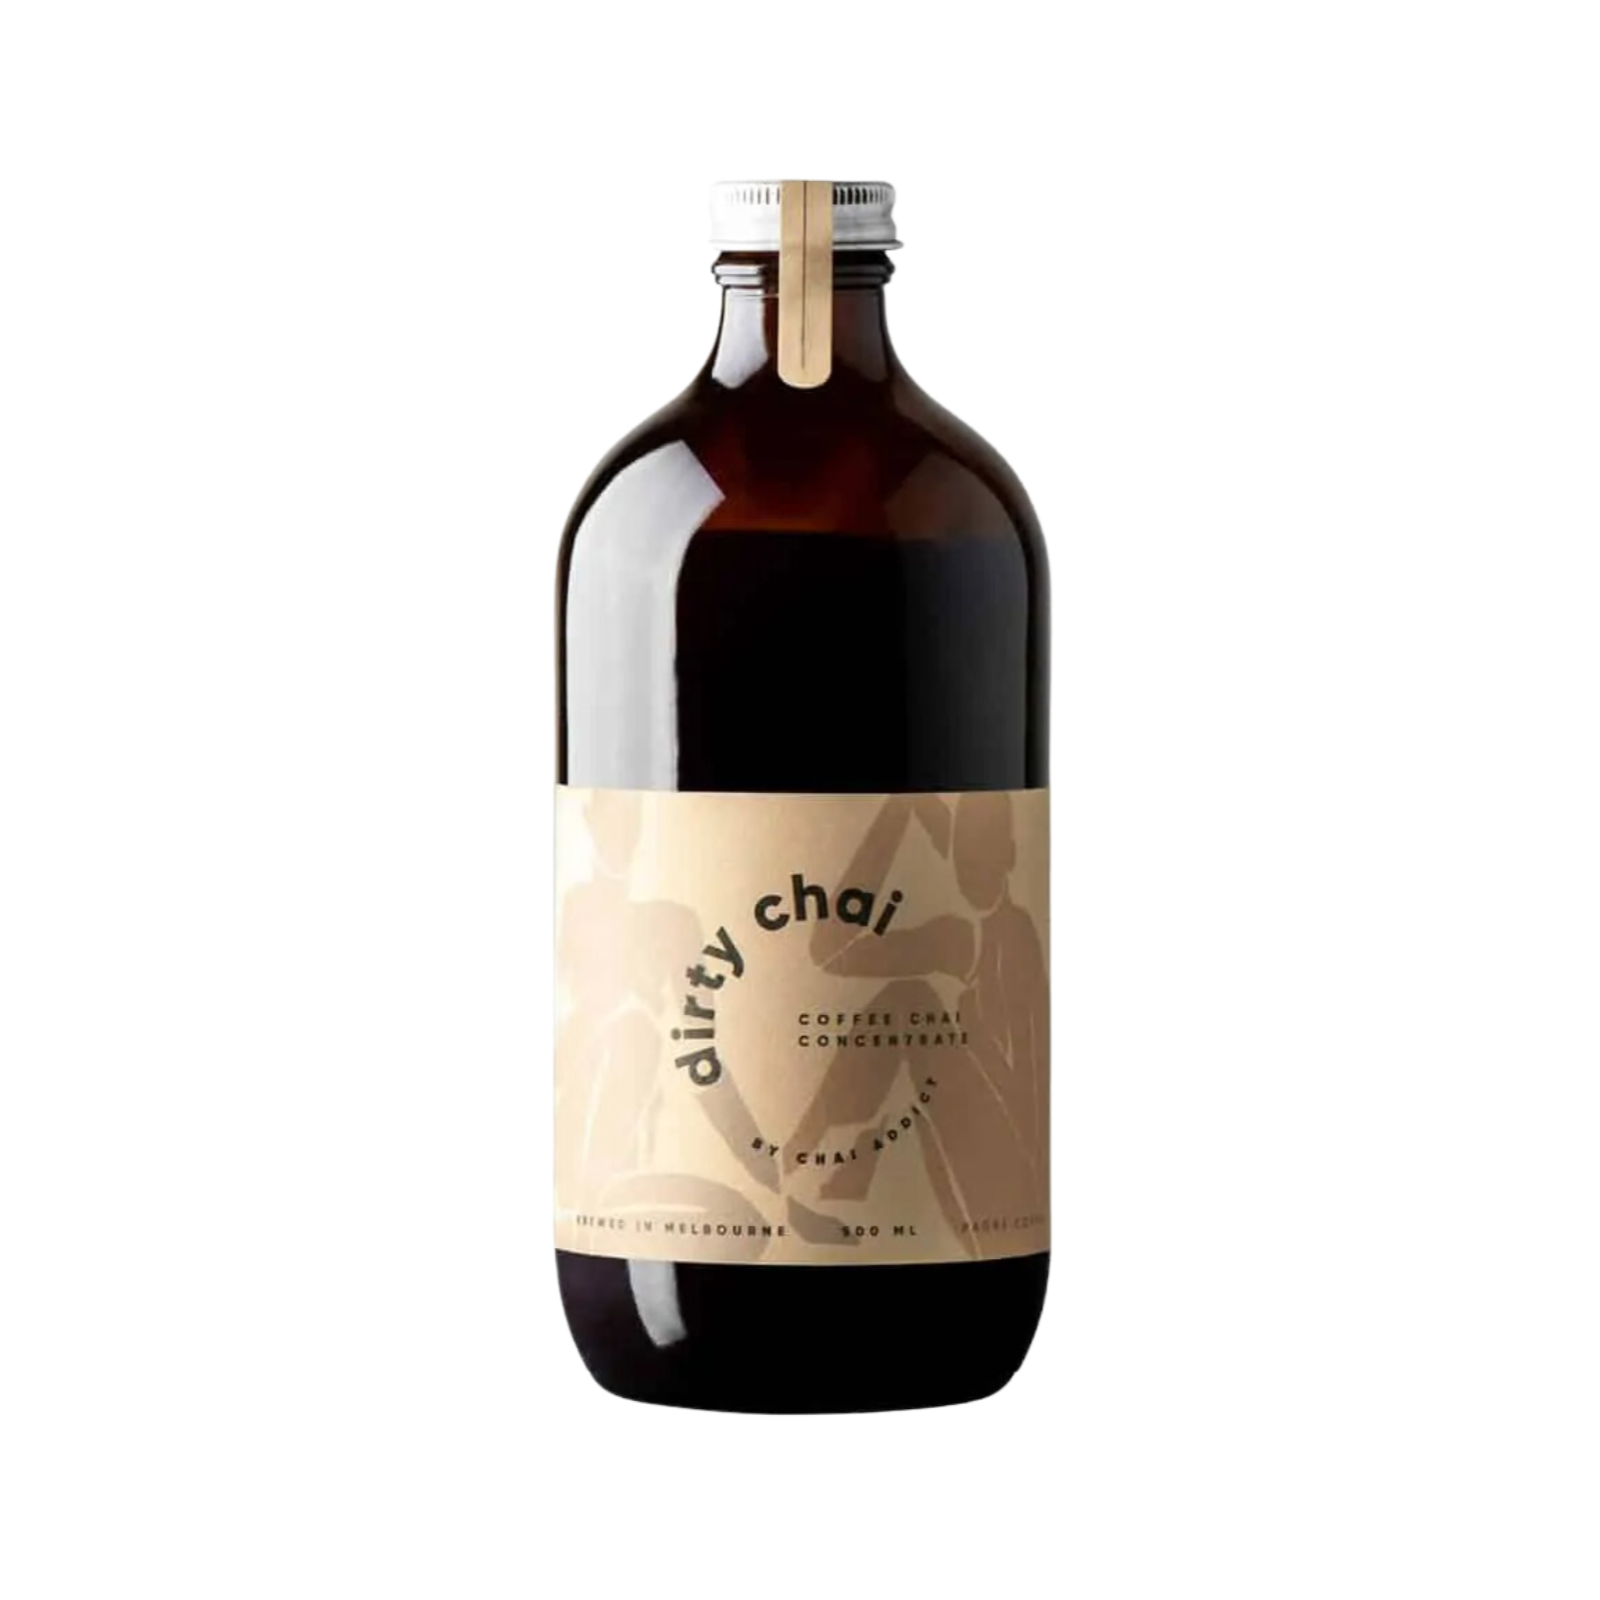 dirty chai coffee chai concentrate by chai addict bottle with a brown label, 500ml